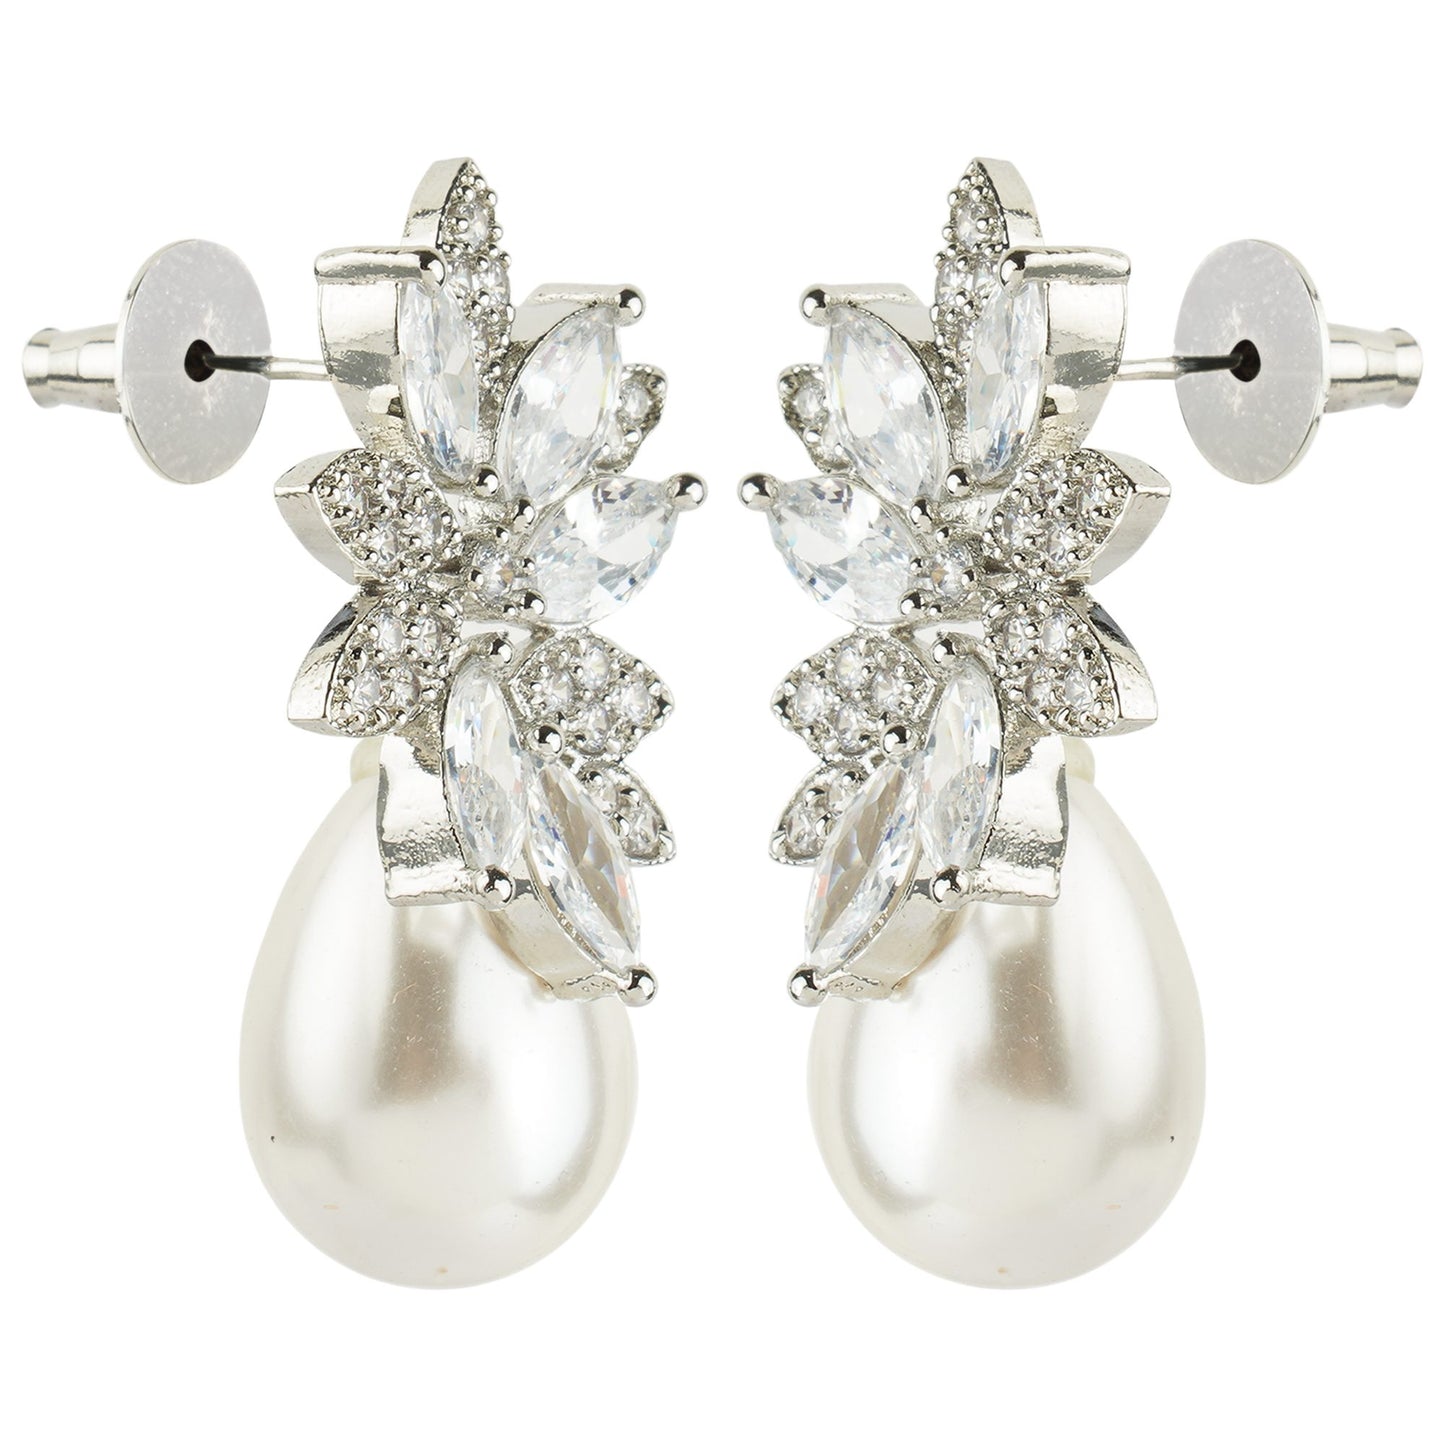 Magnificent Diamonte Pearl and Flower Stud Earring